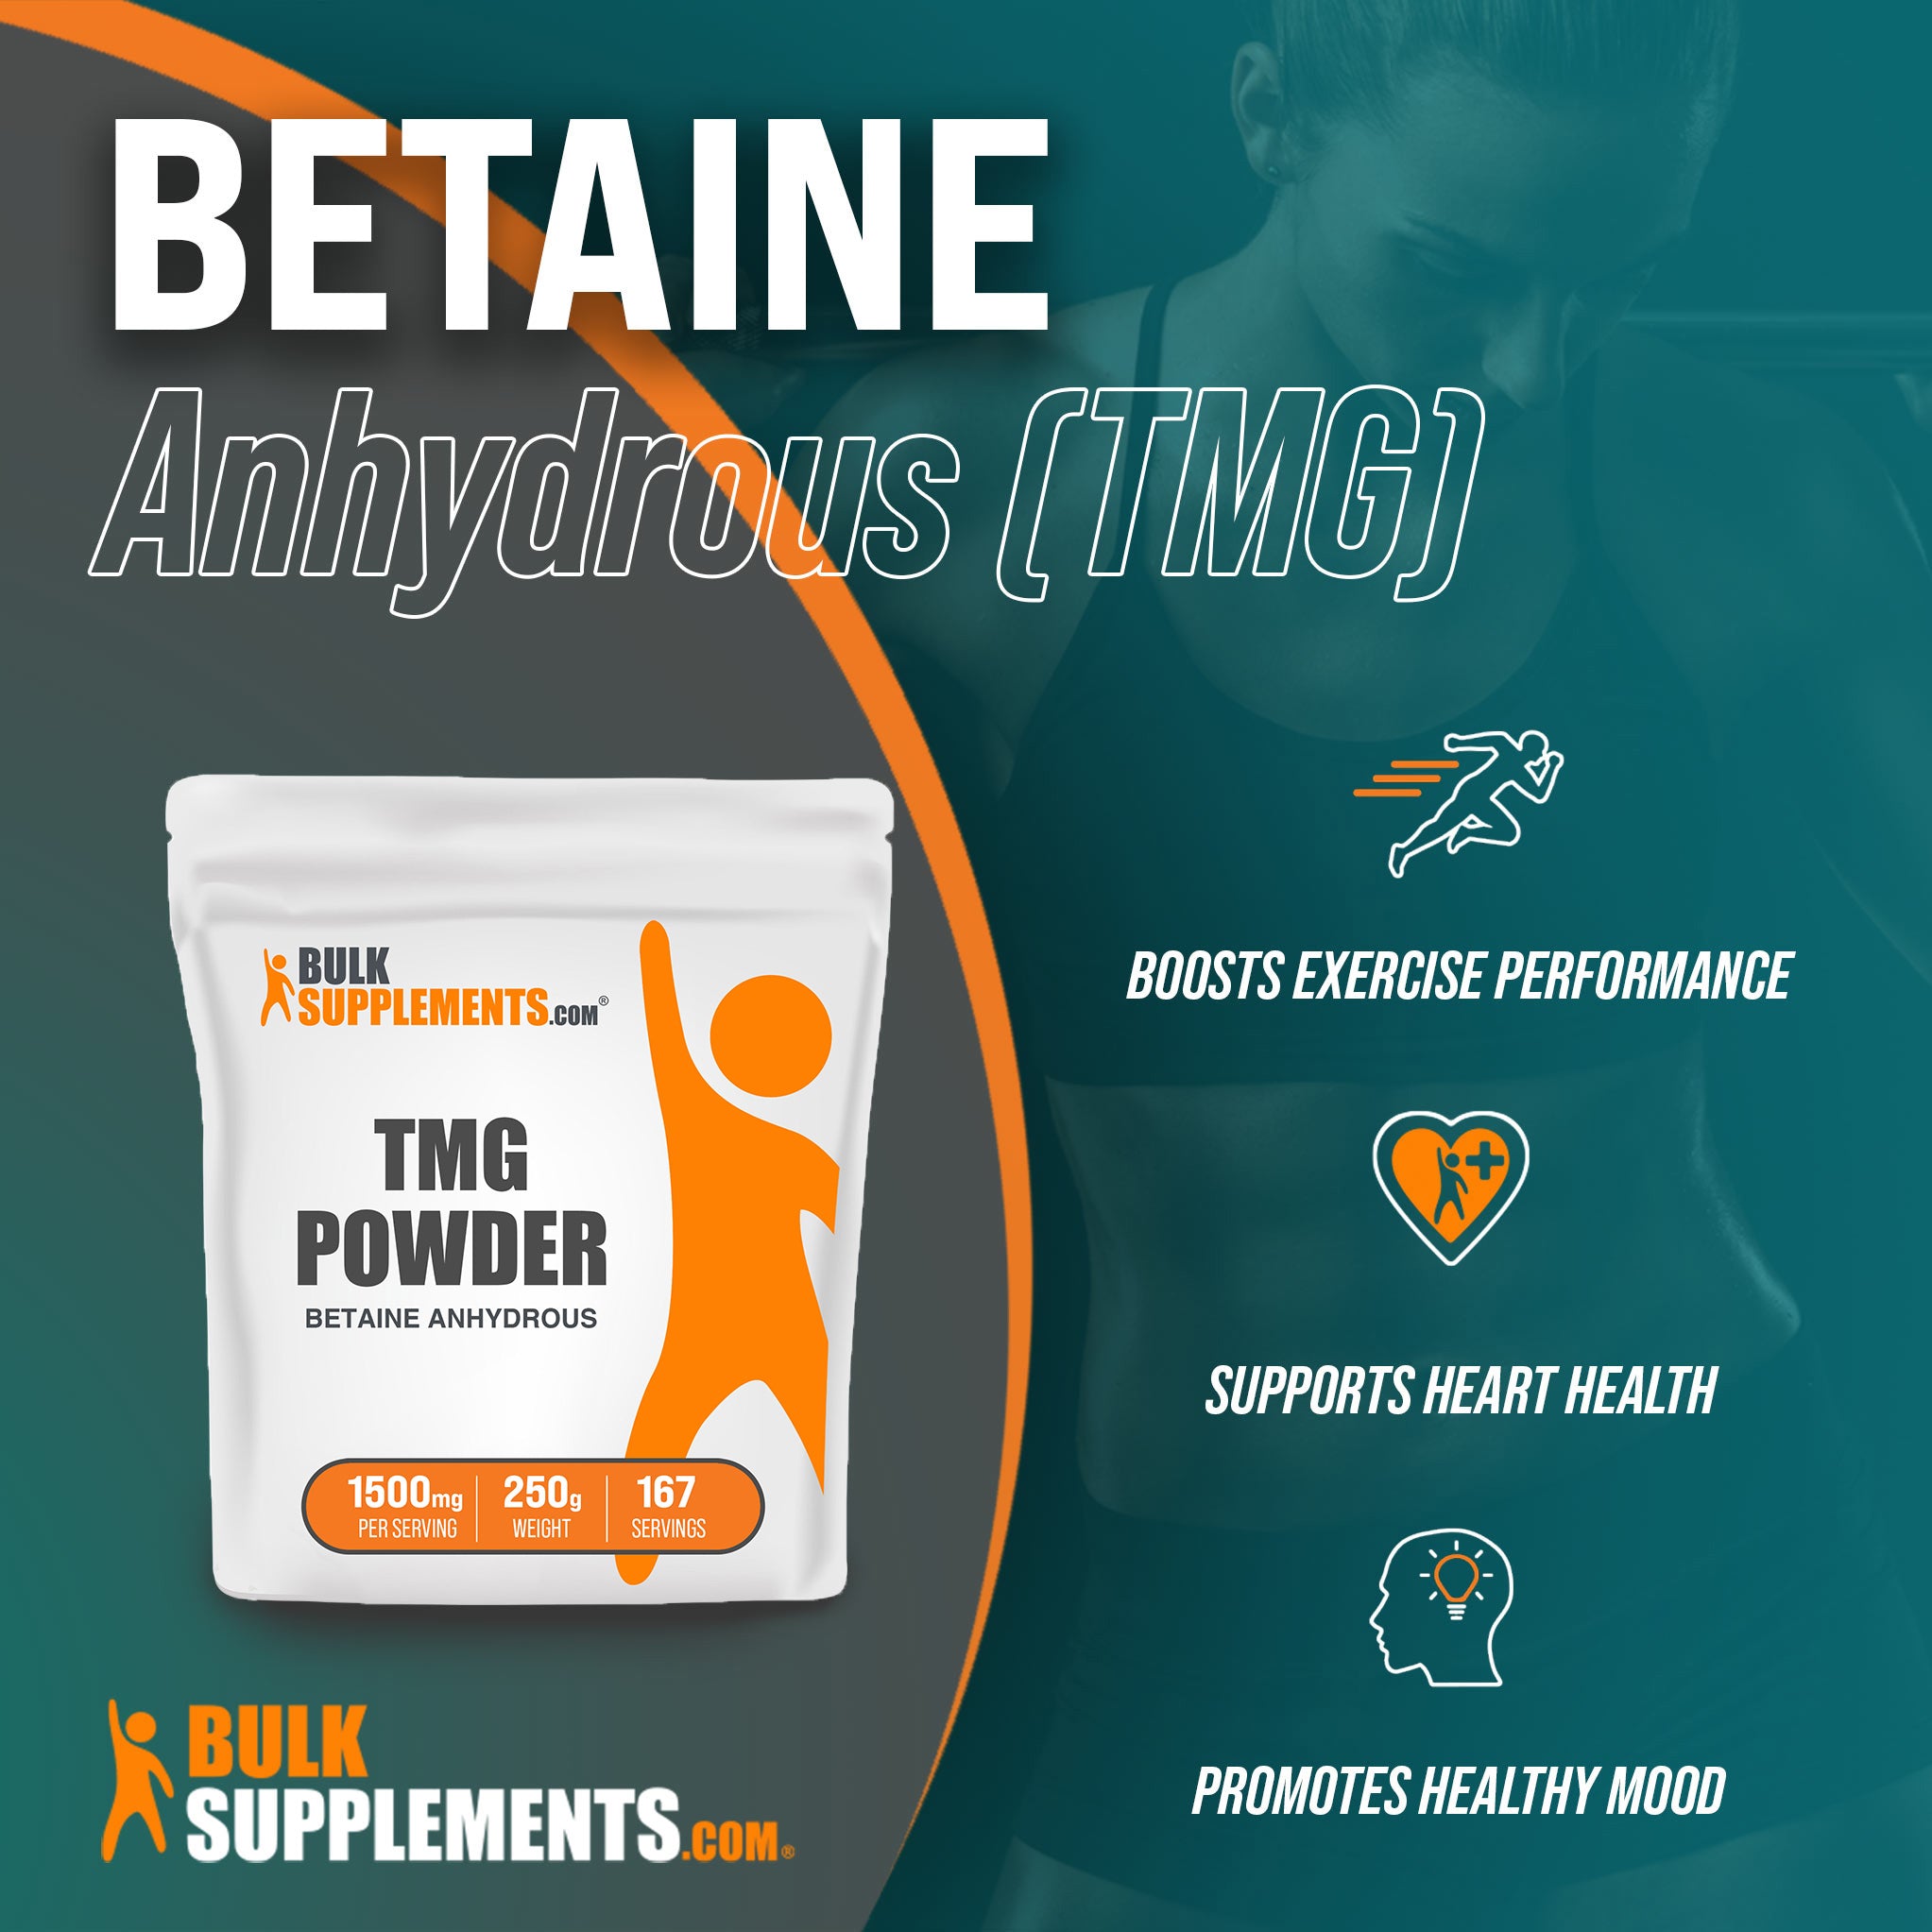 Benefits of Betaine Anhydrous